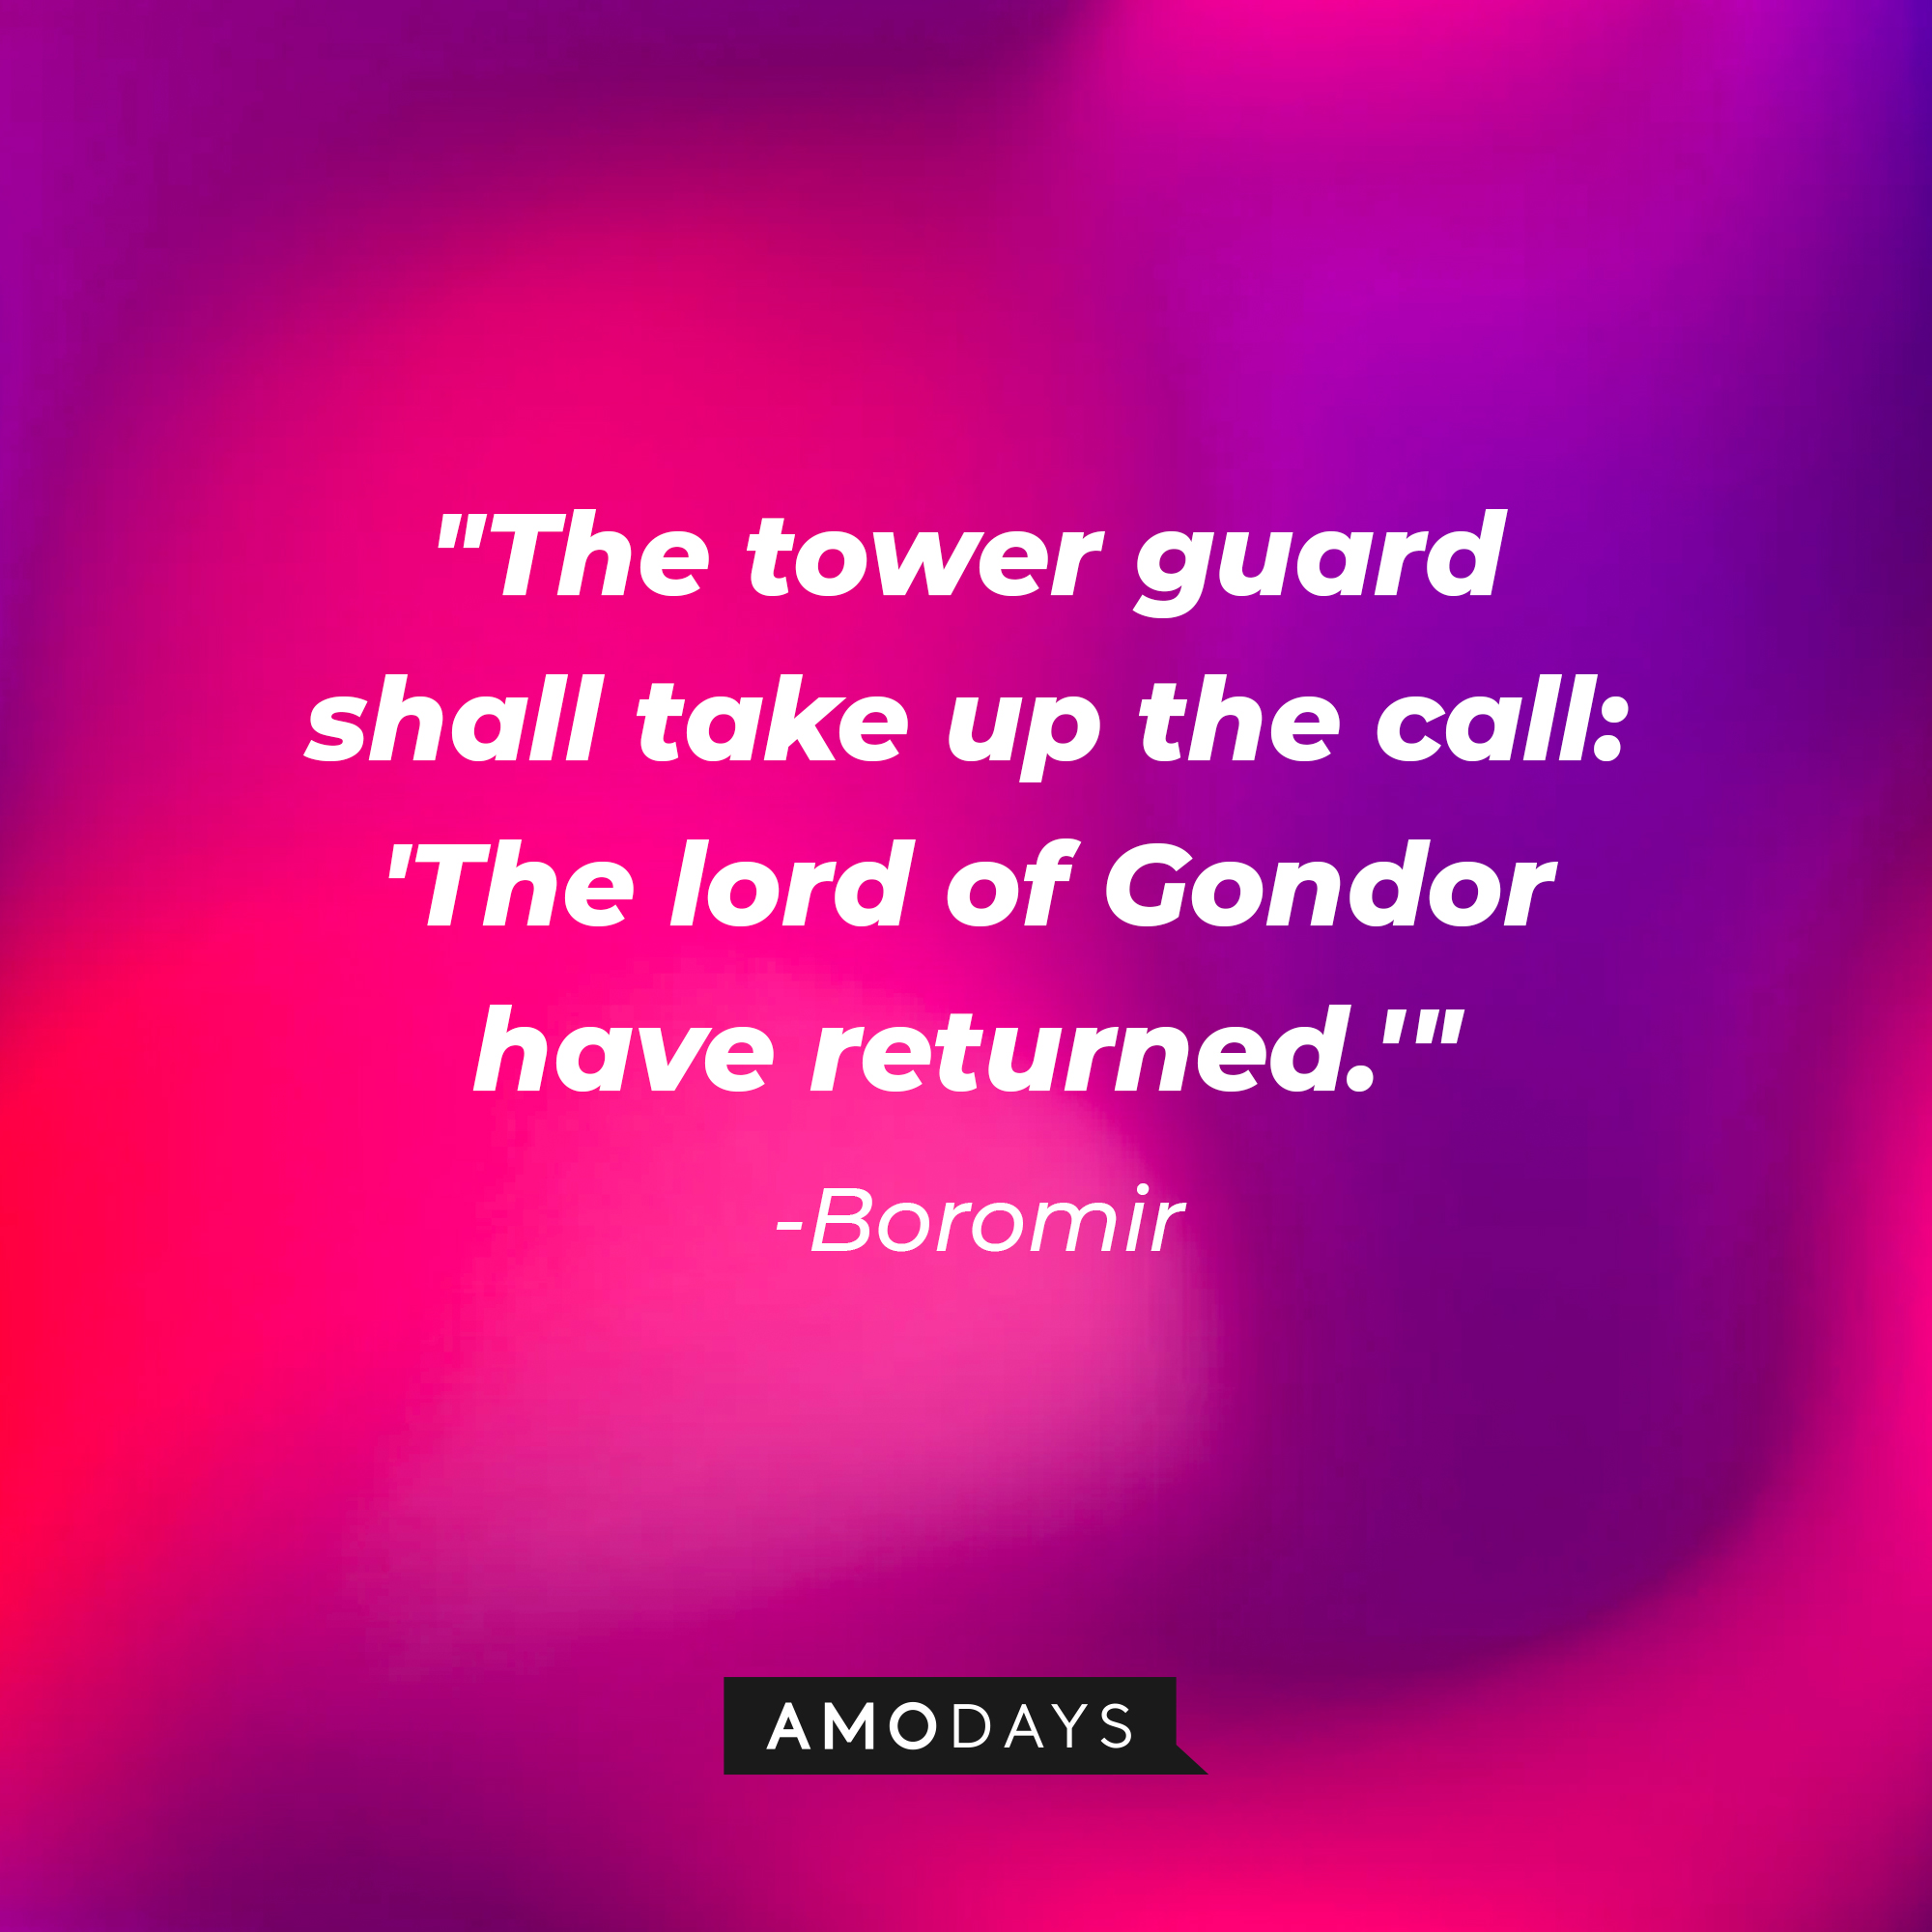 Boromir's quote: "The tower guard shall take up the call: 'The lord of Gondor have returned.'" | Source: AmoDays